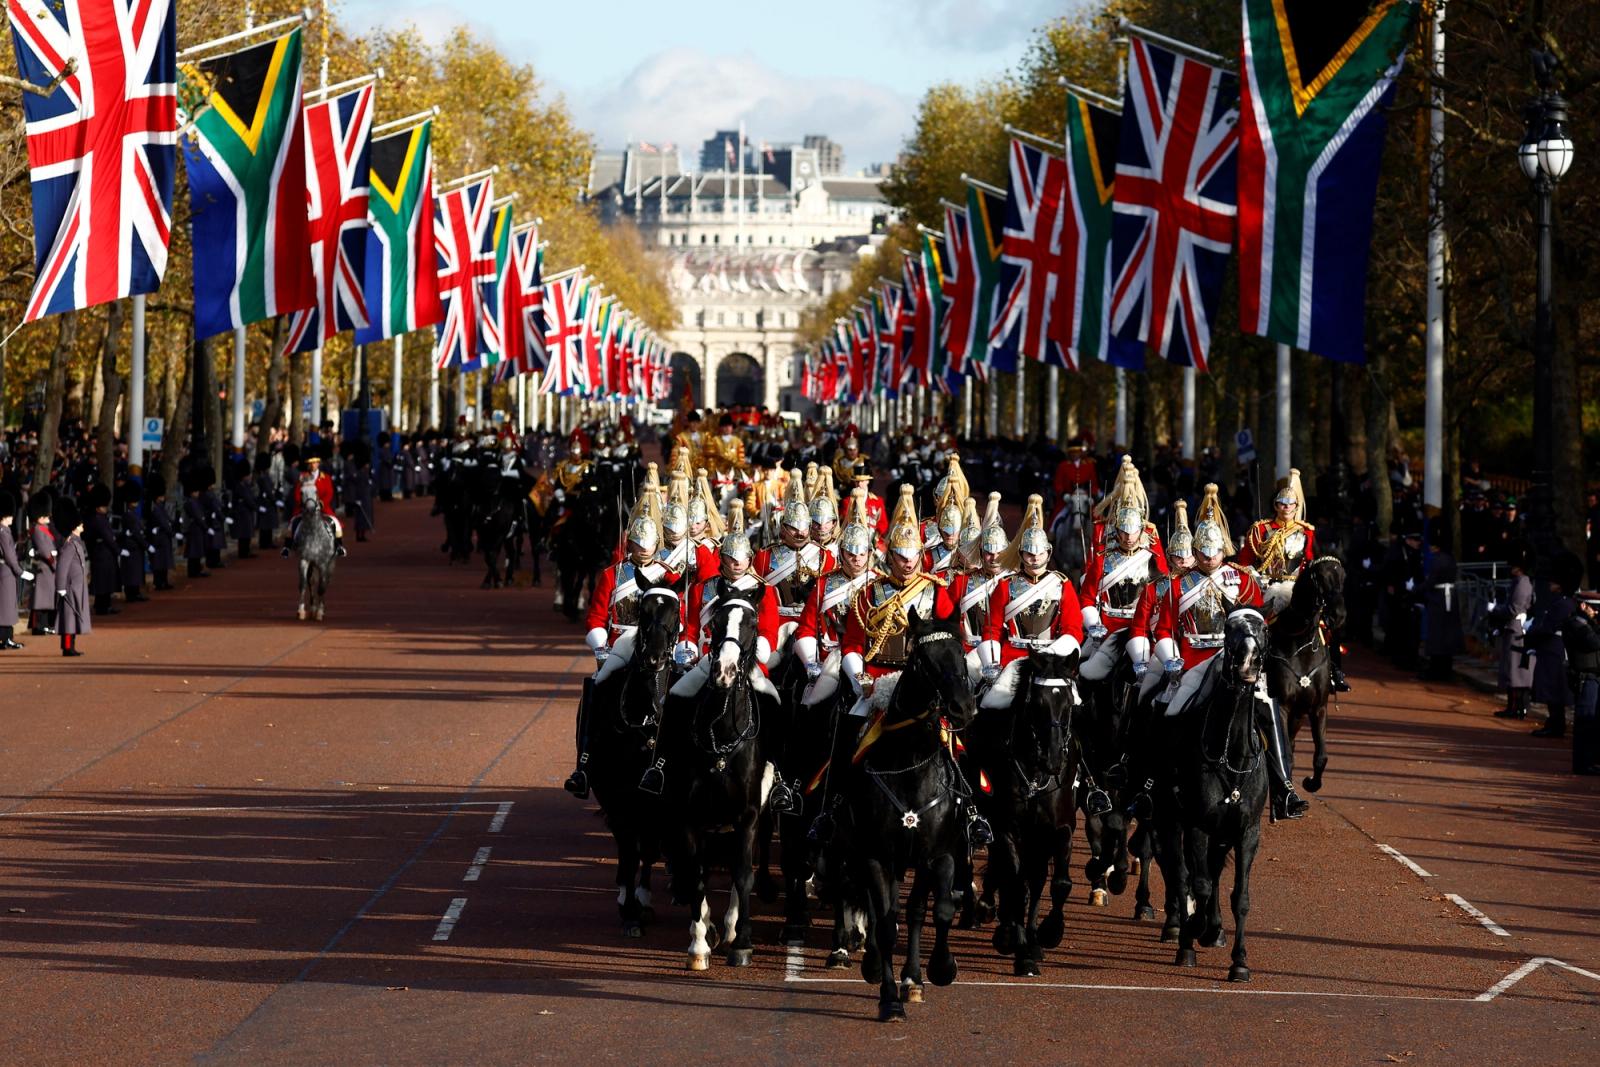 The King's Troop Royal Horse Artillery takes part in a procession during a state visit by South African President Cyril Ramaphos.